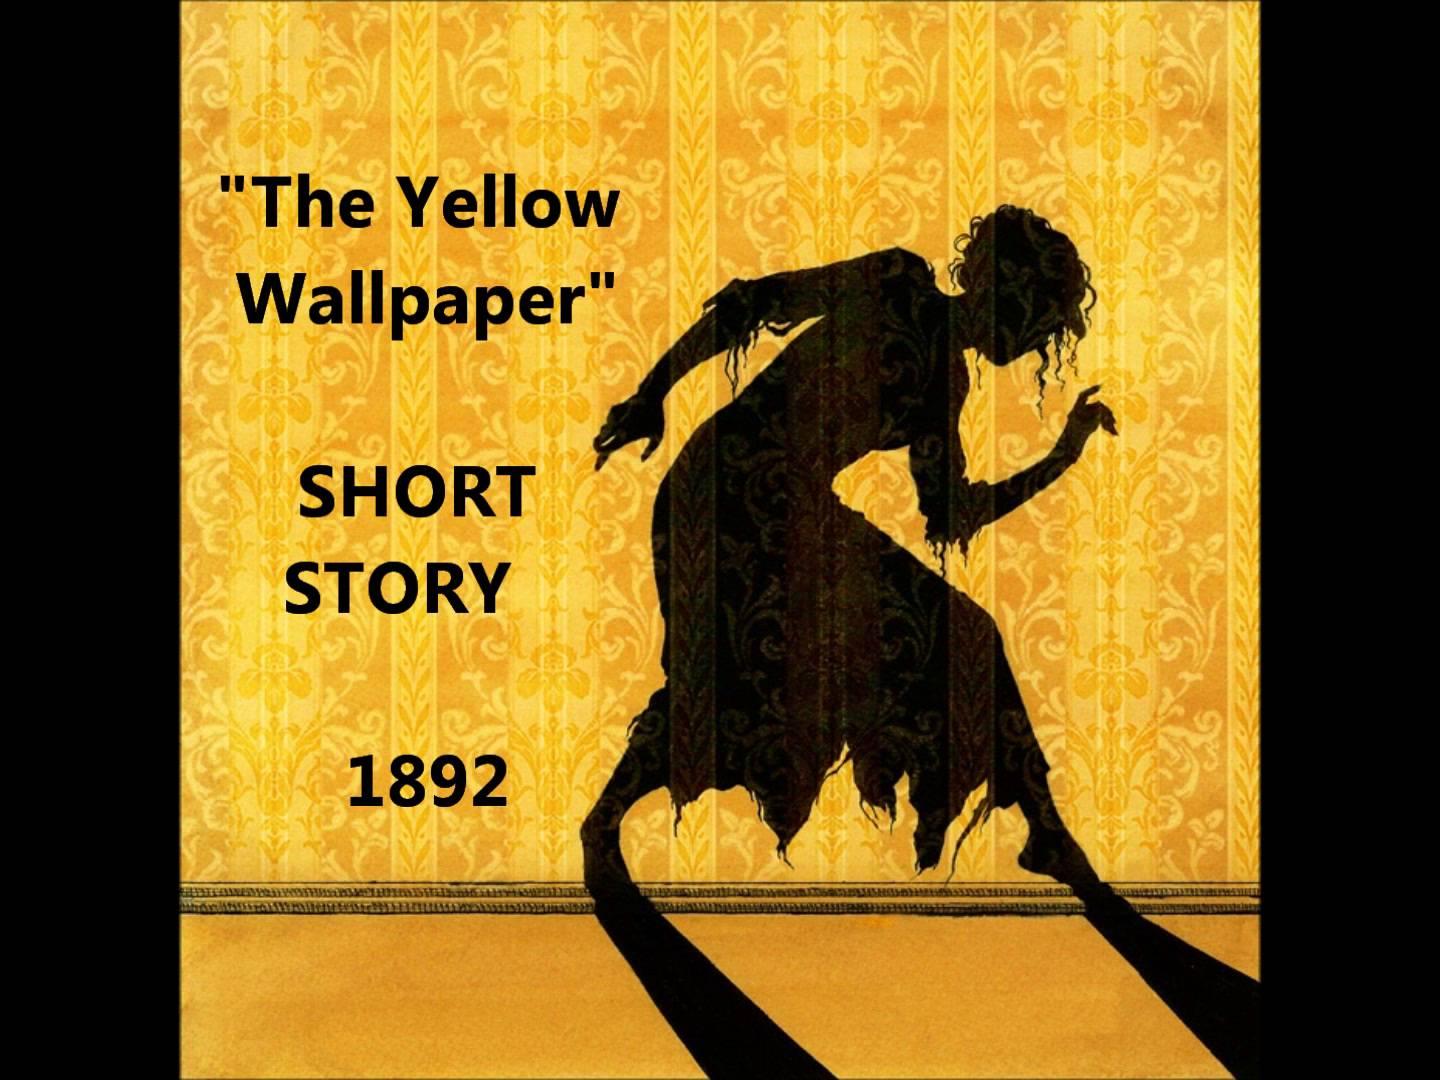 1440 x 1080 · jpeg - The Yellow Wallpaper and the story of Charlotte Perkins Gilman | Anglozine